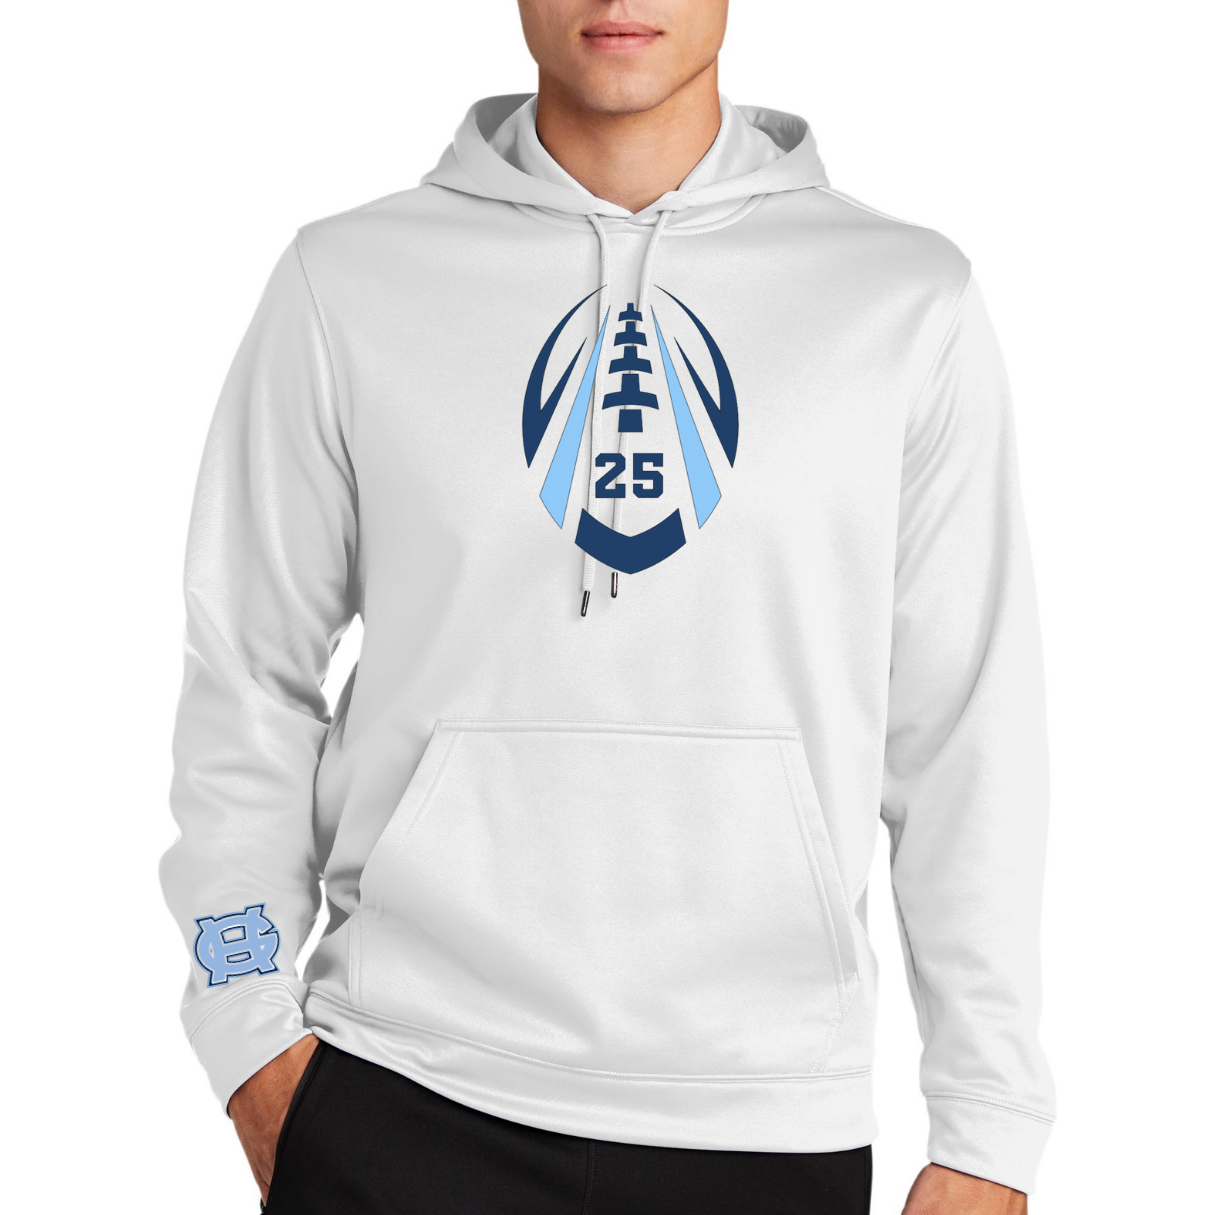 Tides Football Favorite Player Performance Hooded Sweatshirt- Adult and Youth